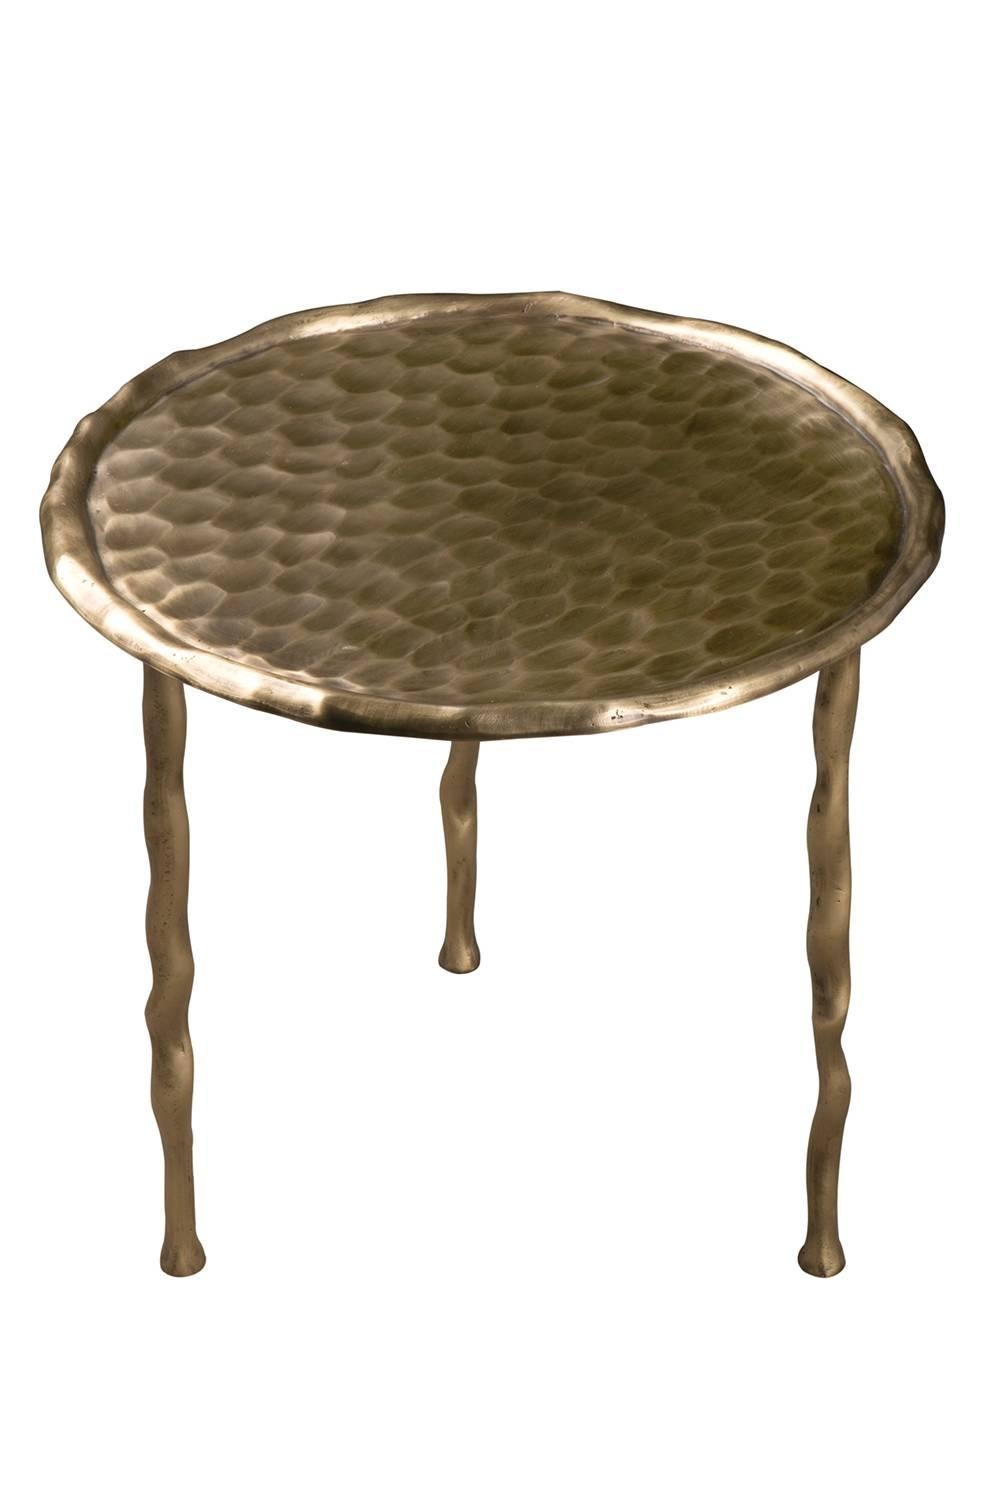 Matching set of two French artistic modern cast brass side tables.

Measures: Large: D 50 cm, H 47 cm. $1795.
Small: D 50 cm, H 42 cm. $1795.